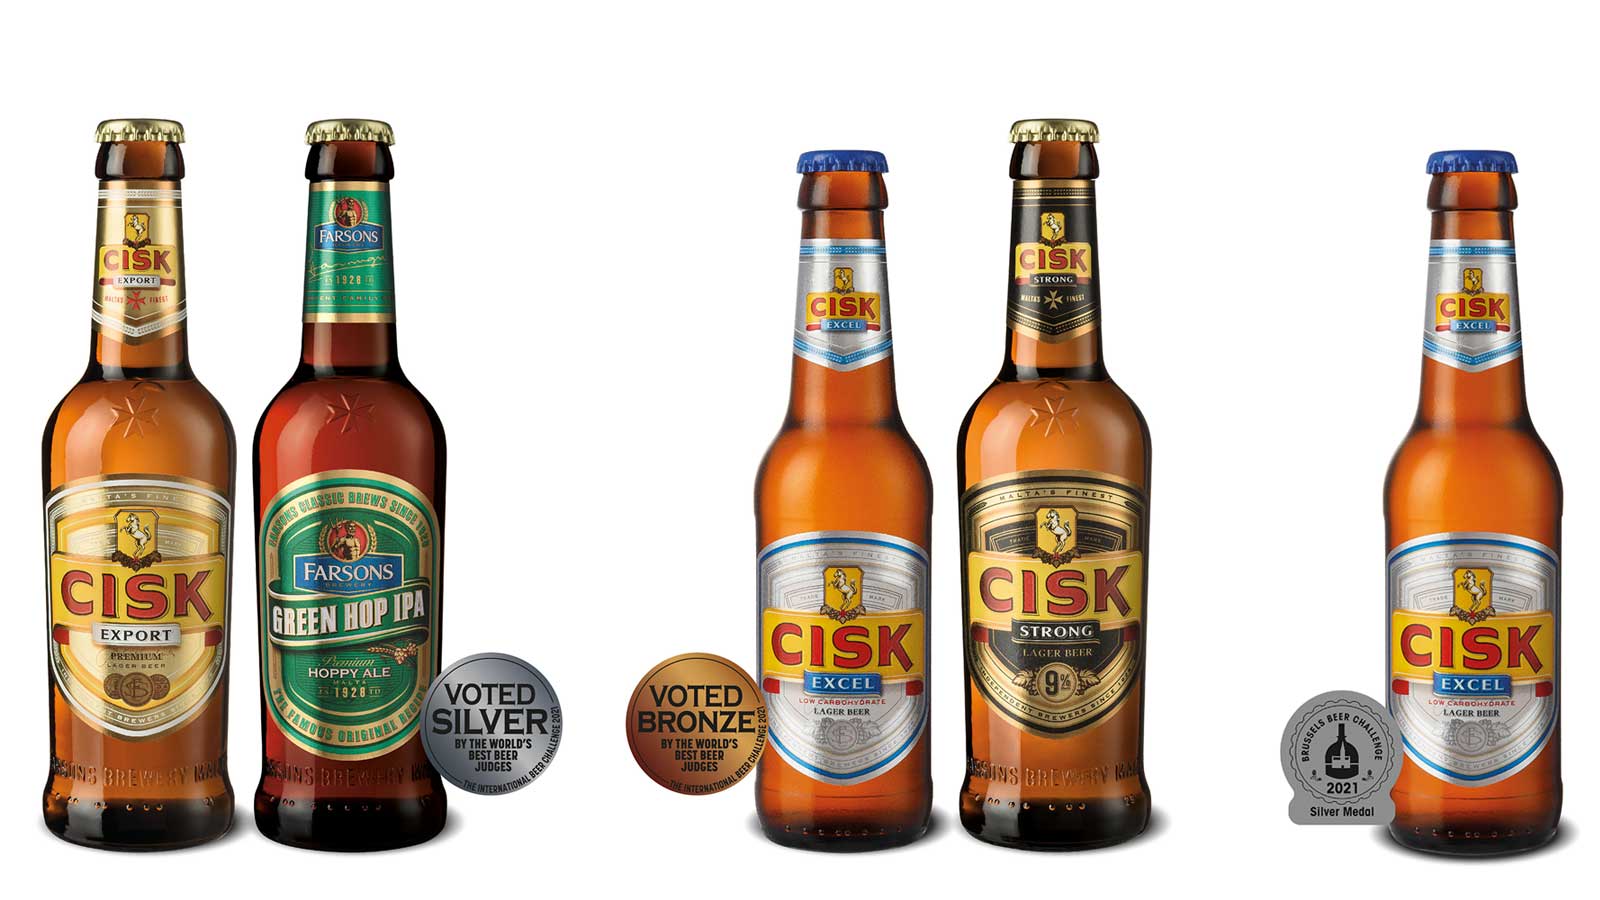 More international awards announced for Farsons beers  